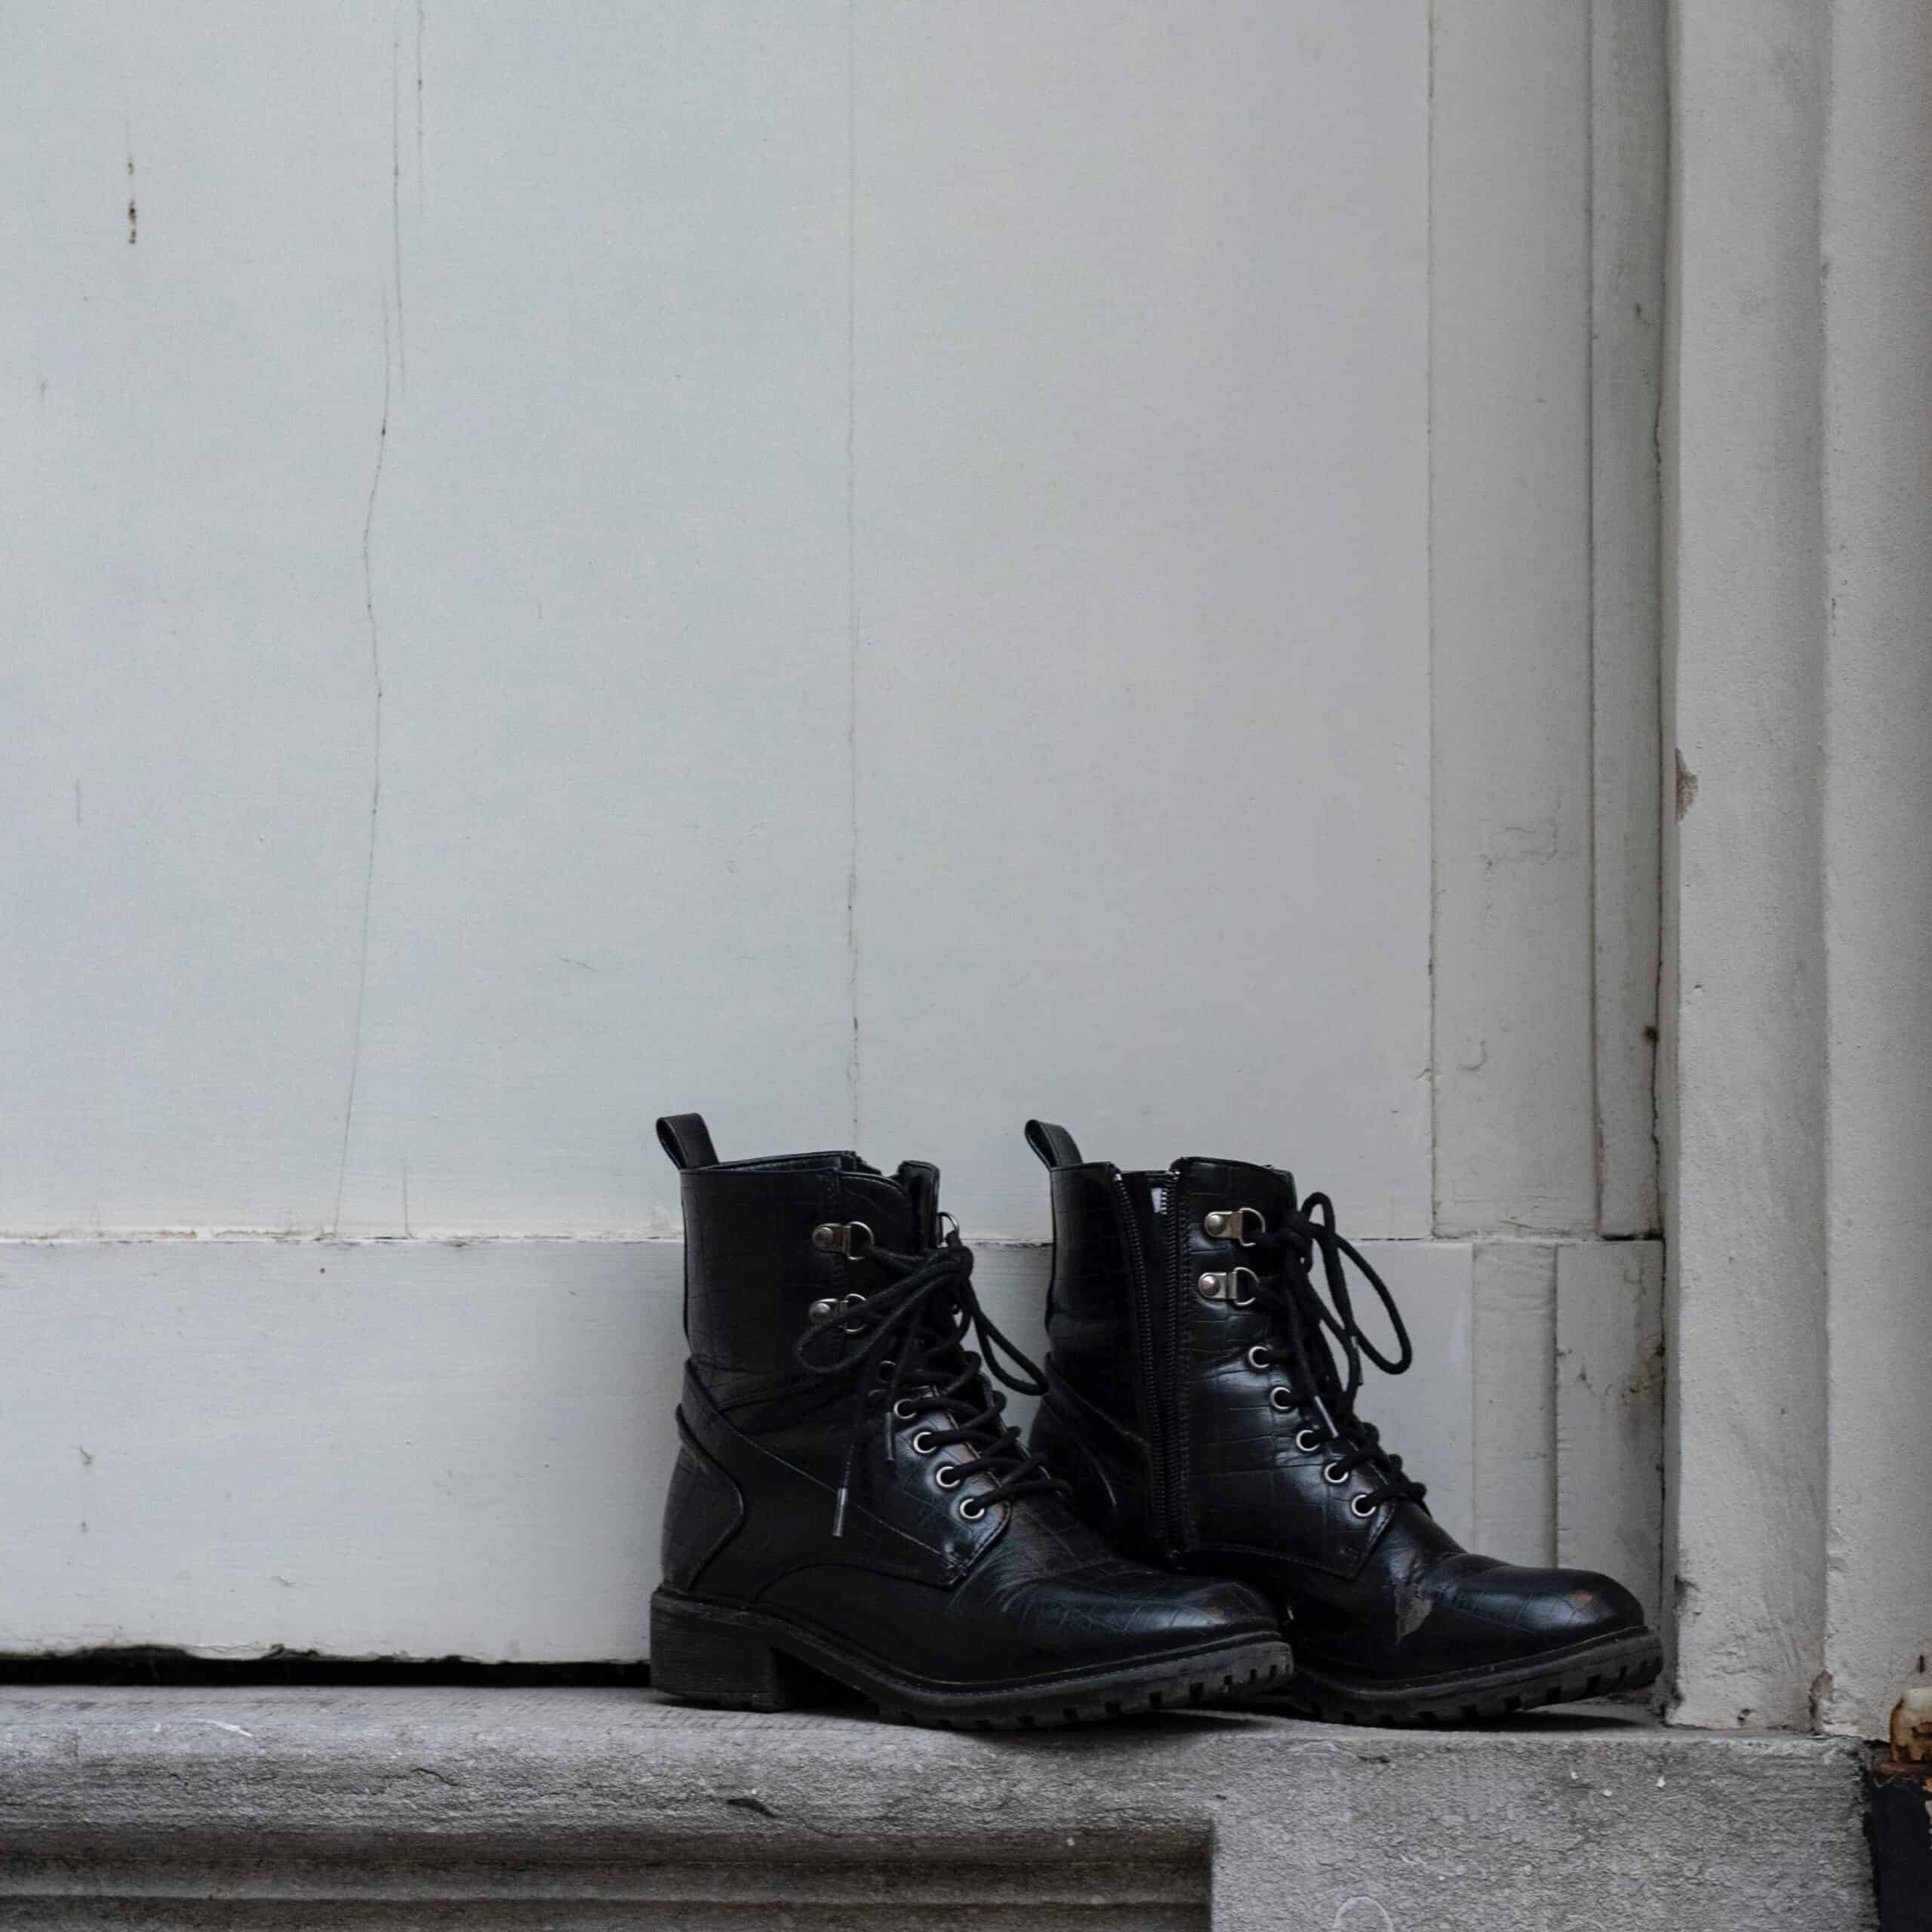 How To Store Leather Boots: 7 Great Tips To Keep In Mind